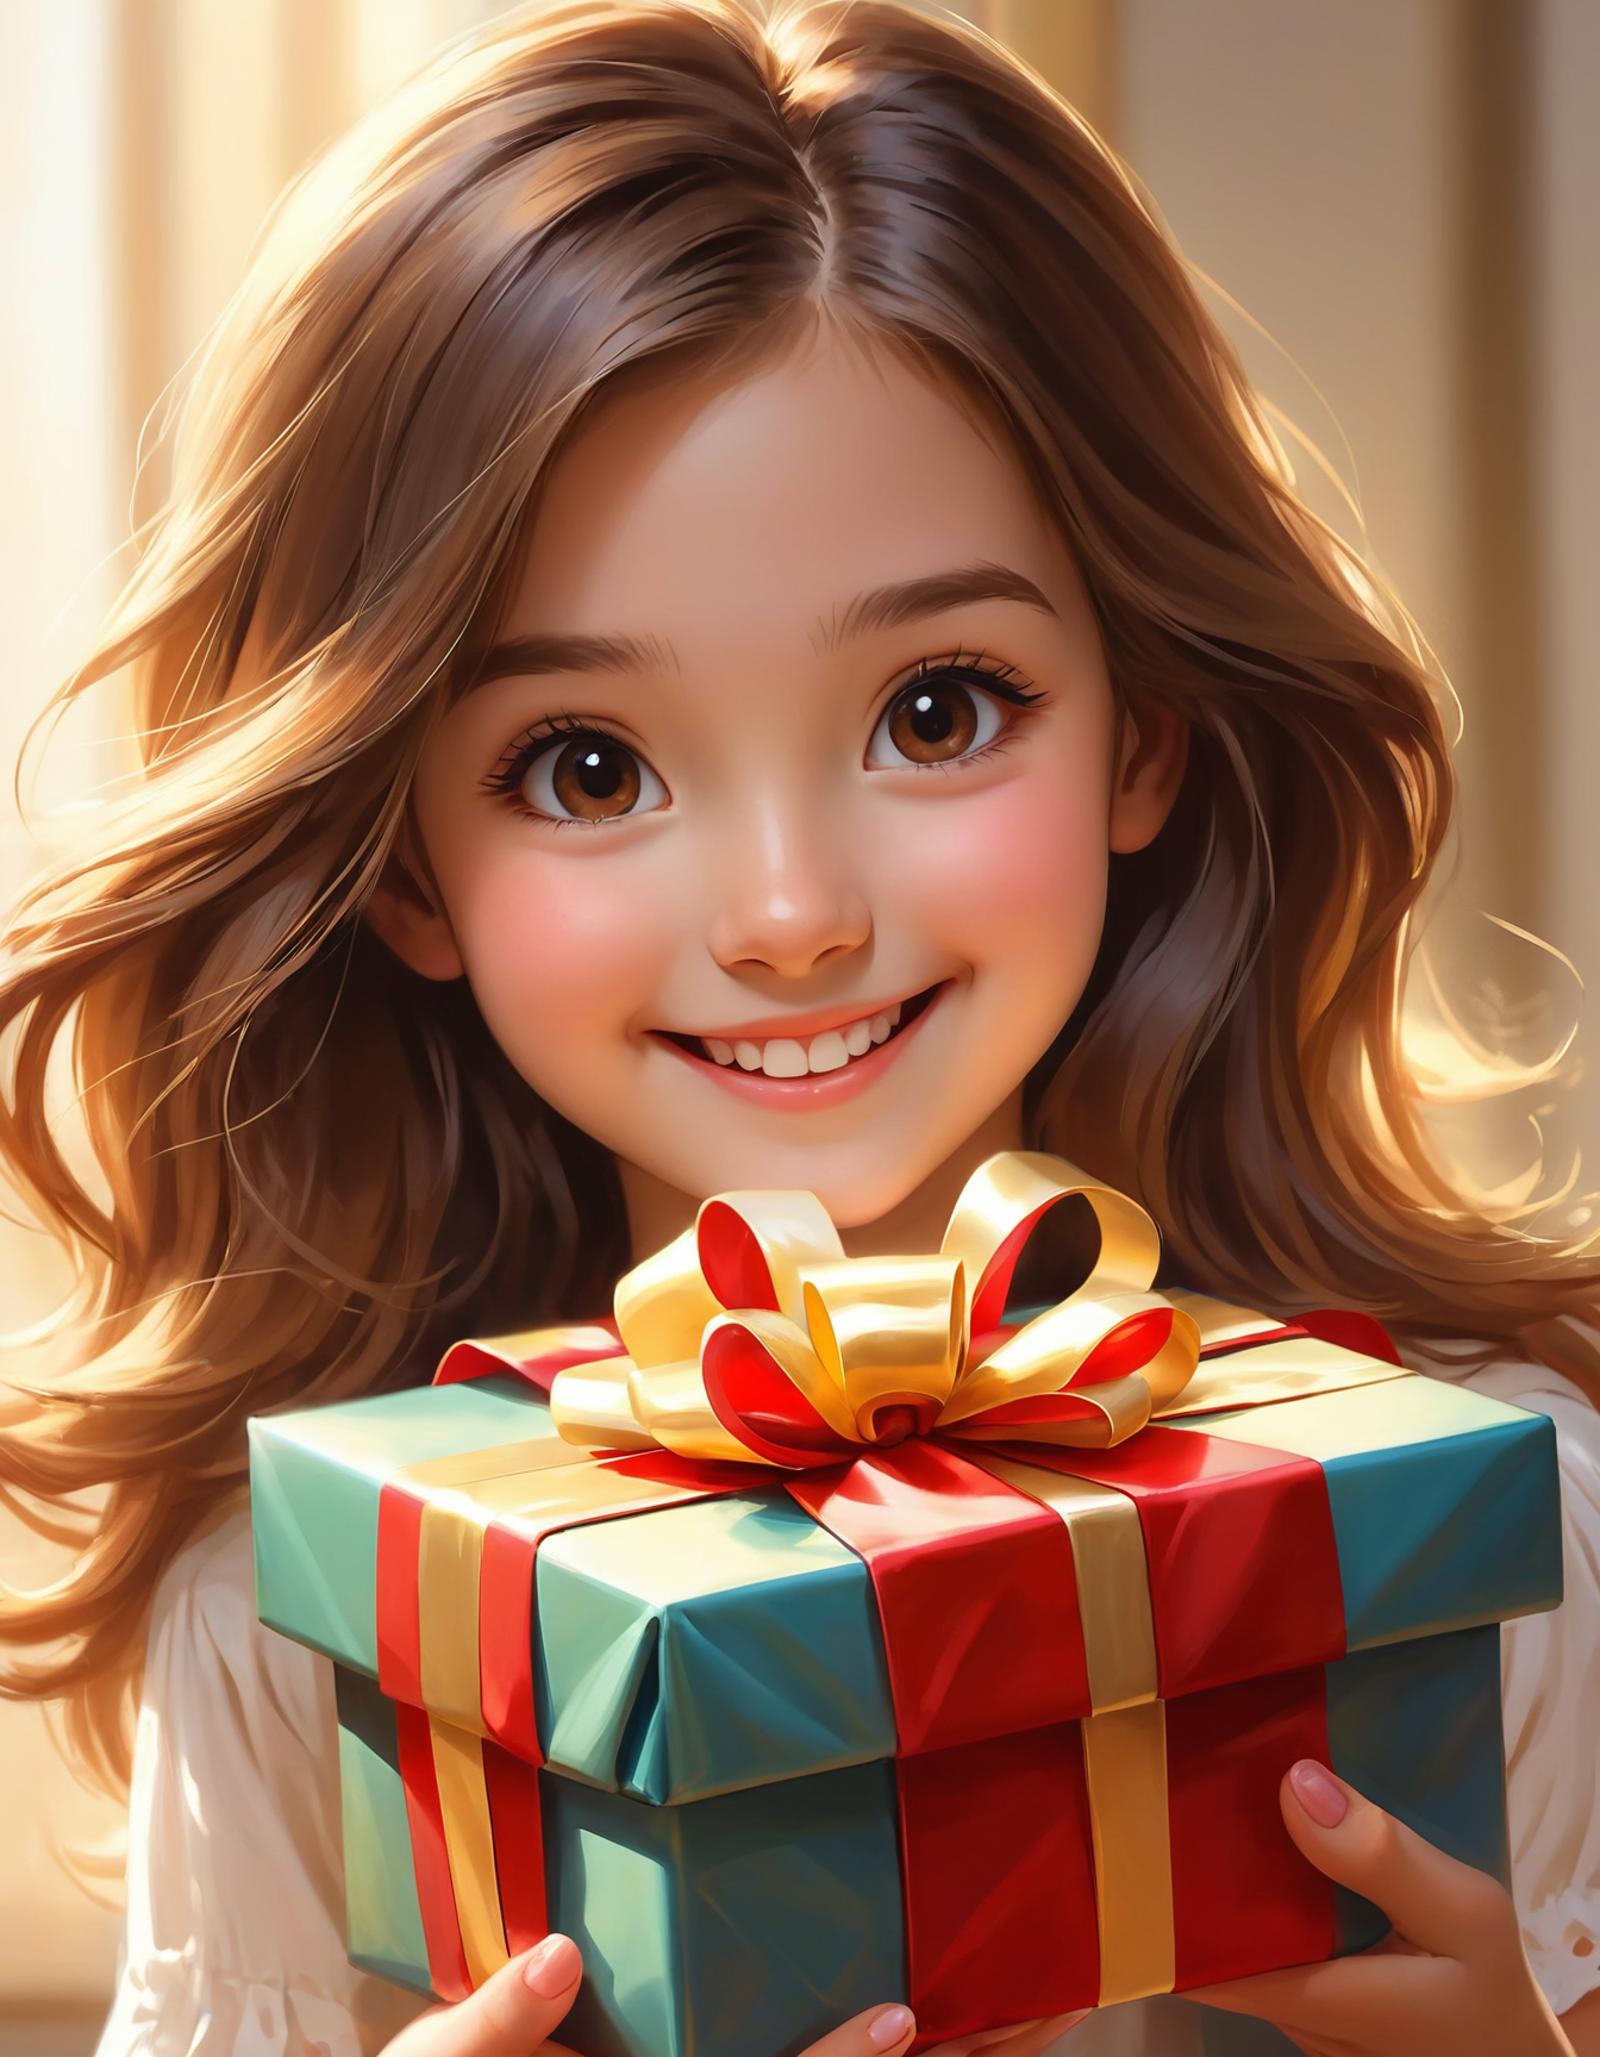 A woman is smiling and holding a blue and red gift box.